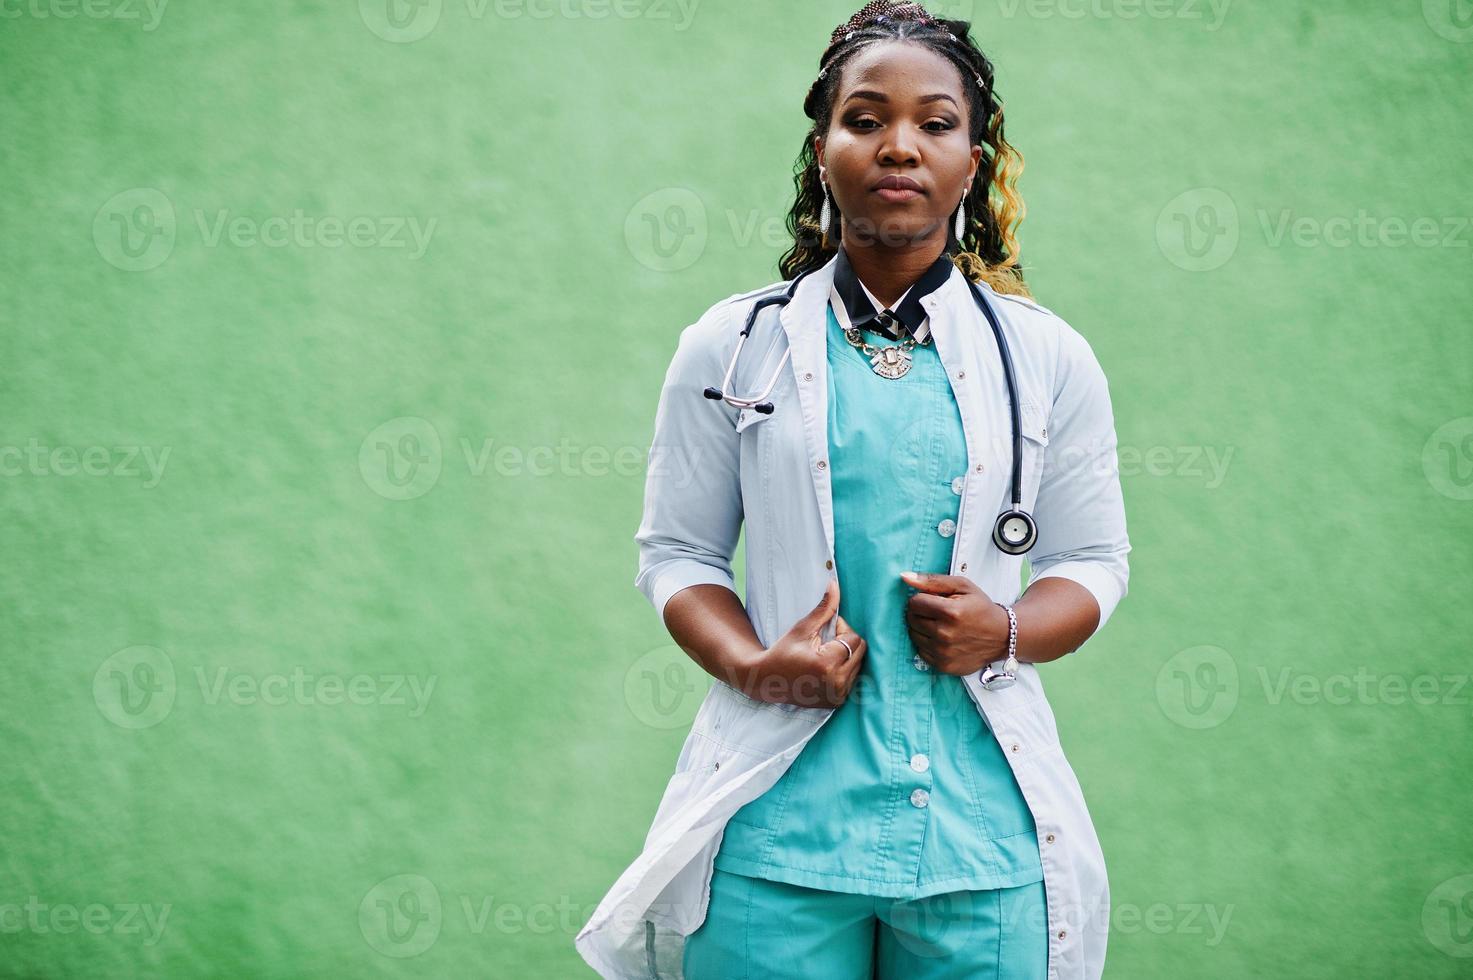 Portrait of African American female doctor with stethoscope wearing lab coat. photo